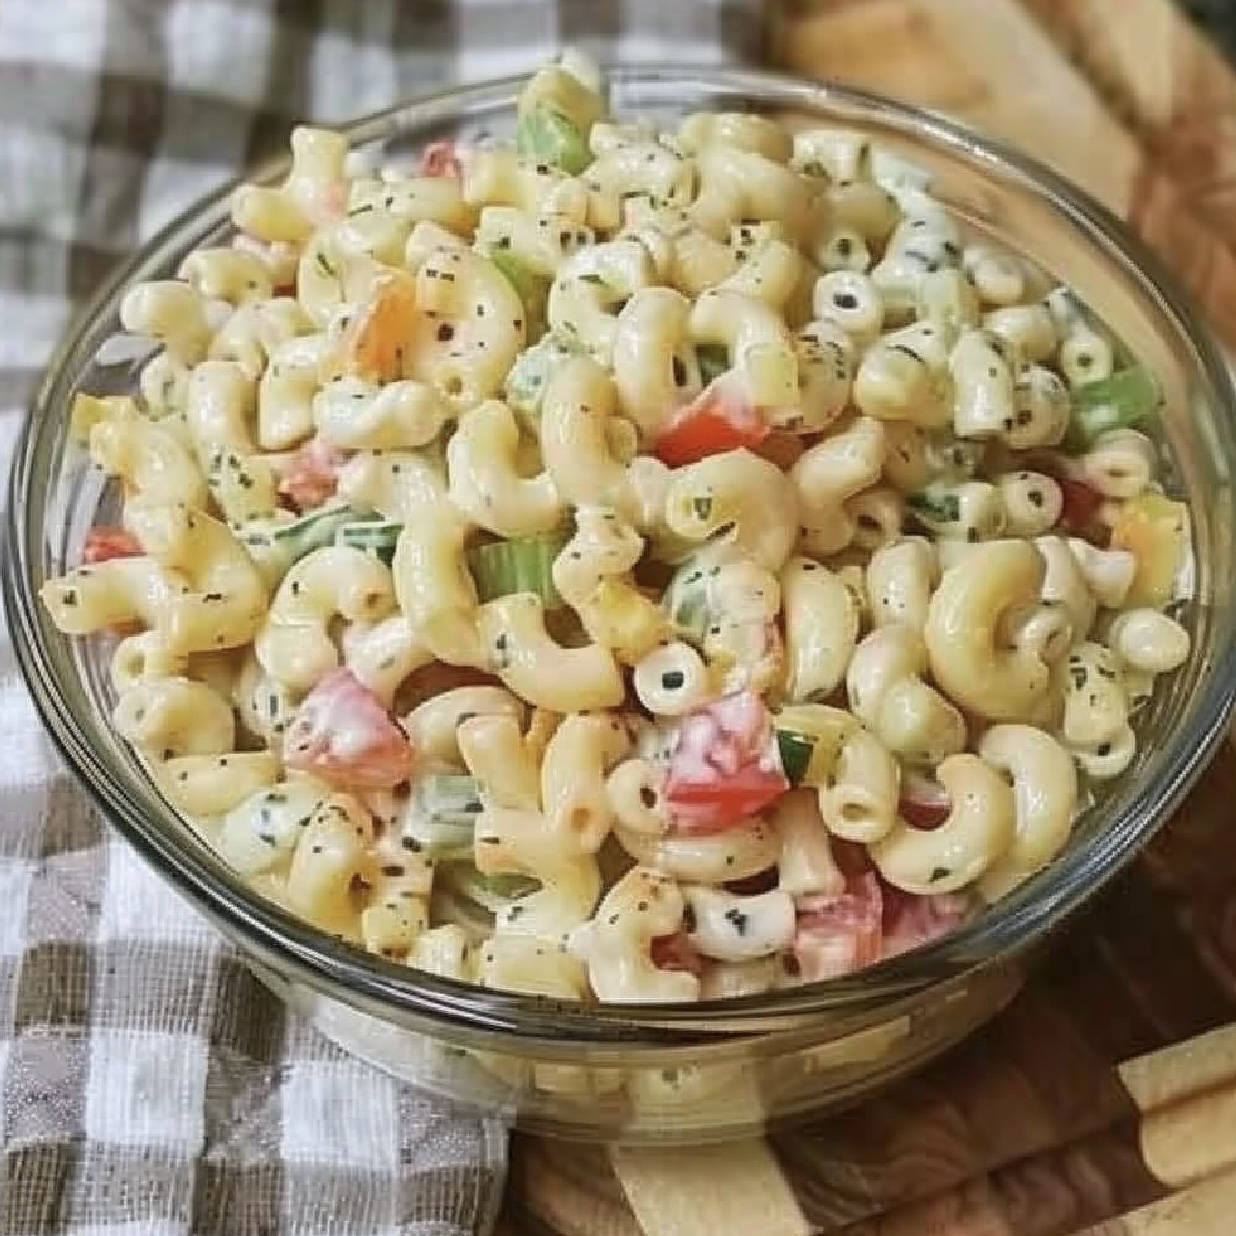 Discover the ultimate macaroni salad recipe - a perfect blend of creamy, crunchy, and tangy flavors. Ideal for picnics, BBQs, and family dinners. Ready in 25 minutes!